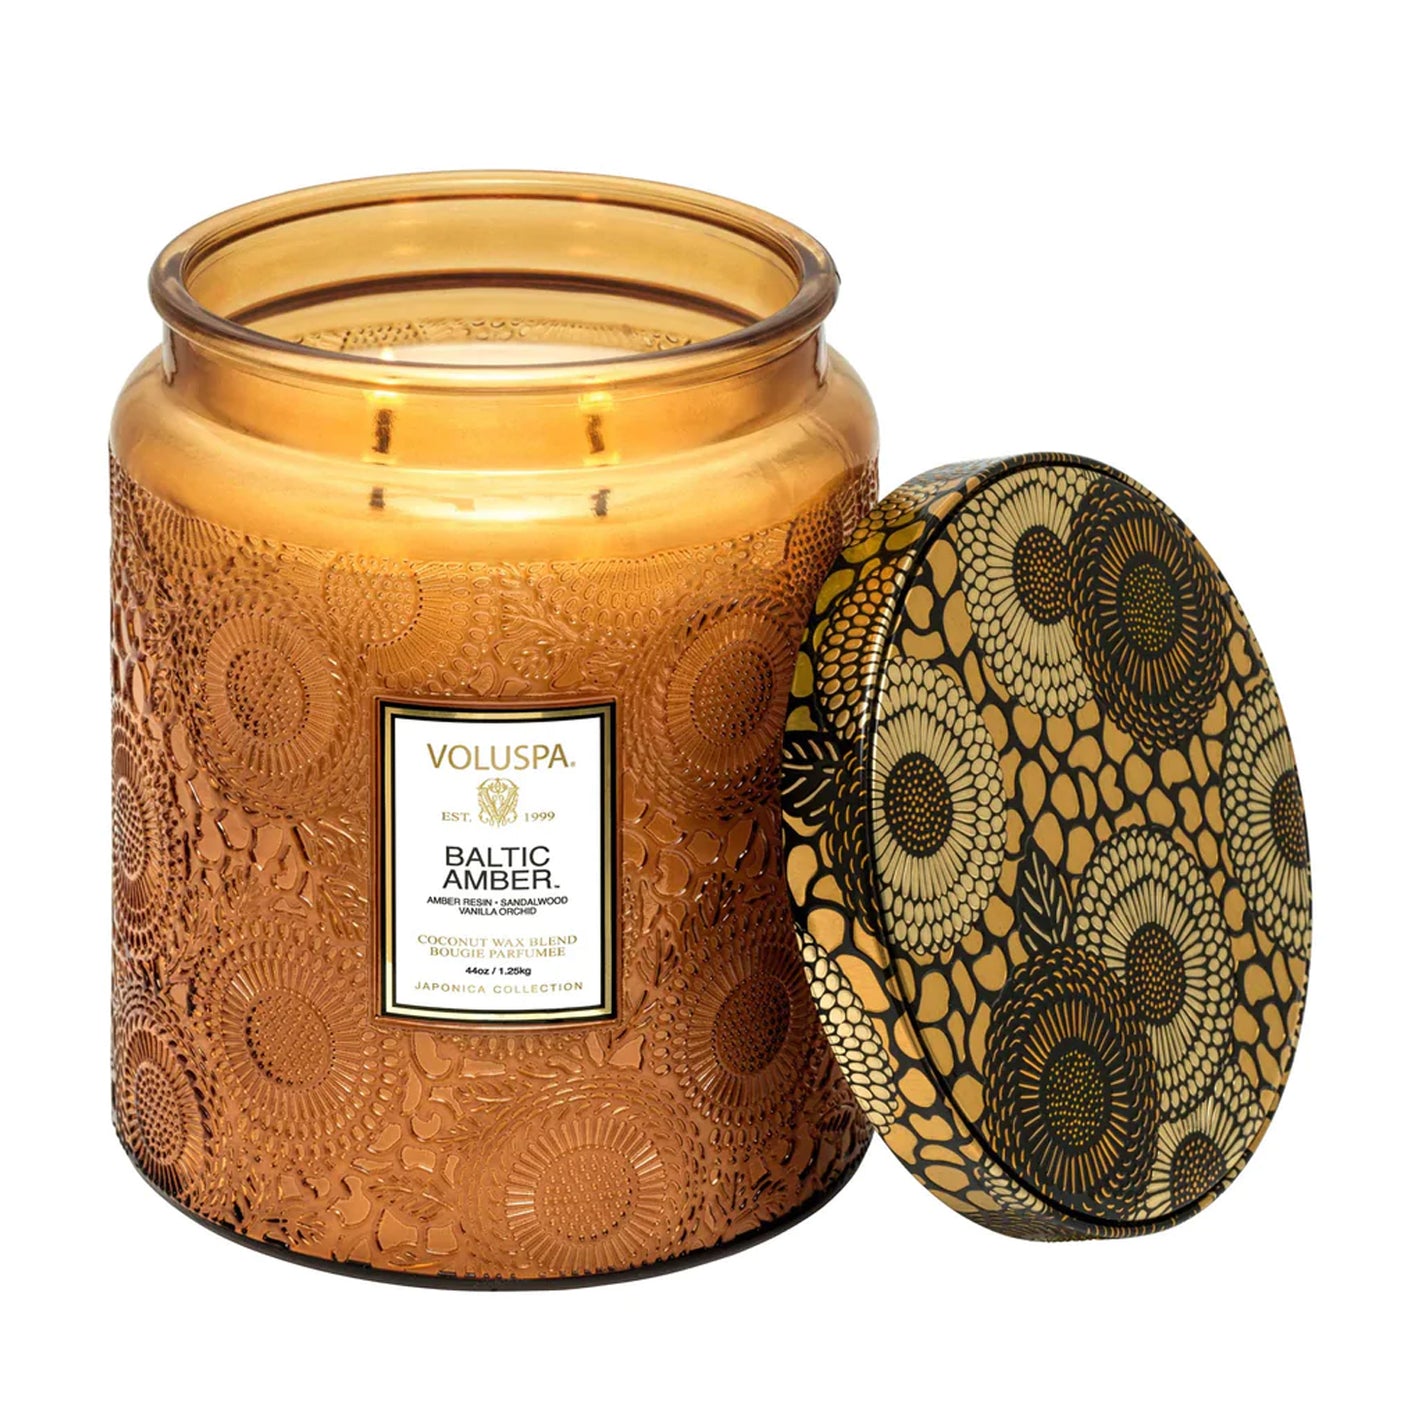 VOLUSPA Baltic Amber Luxe 2 Wick Candle